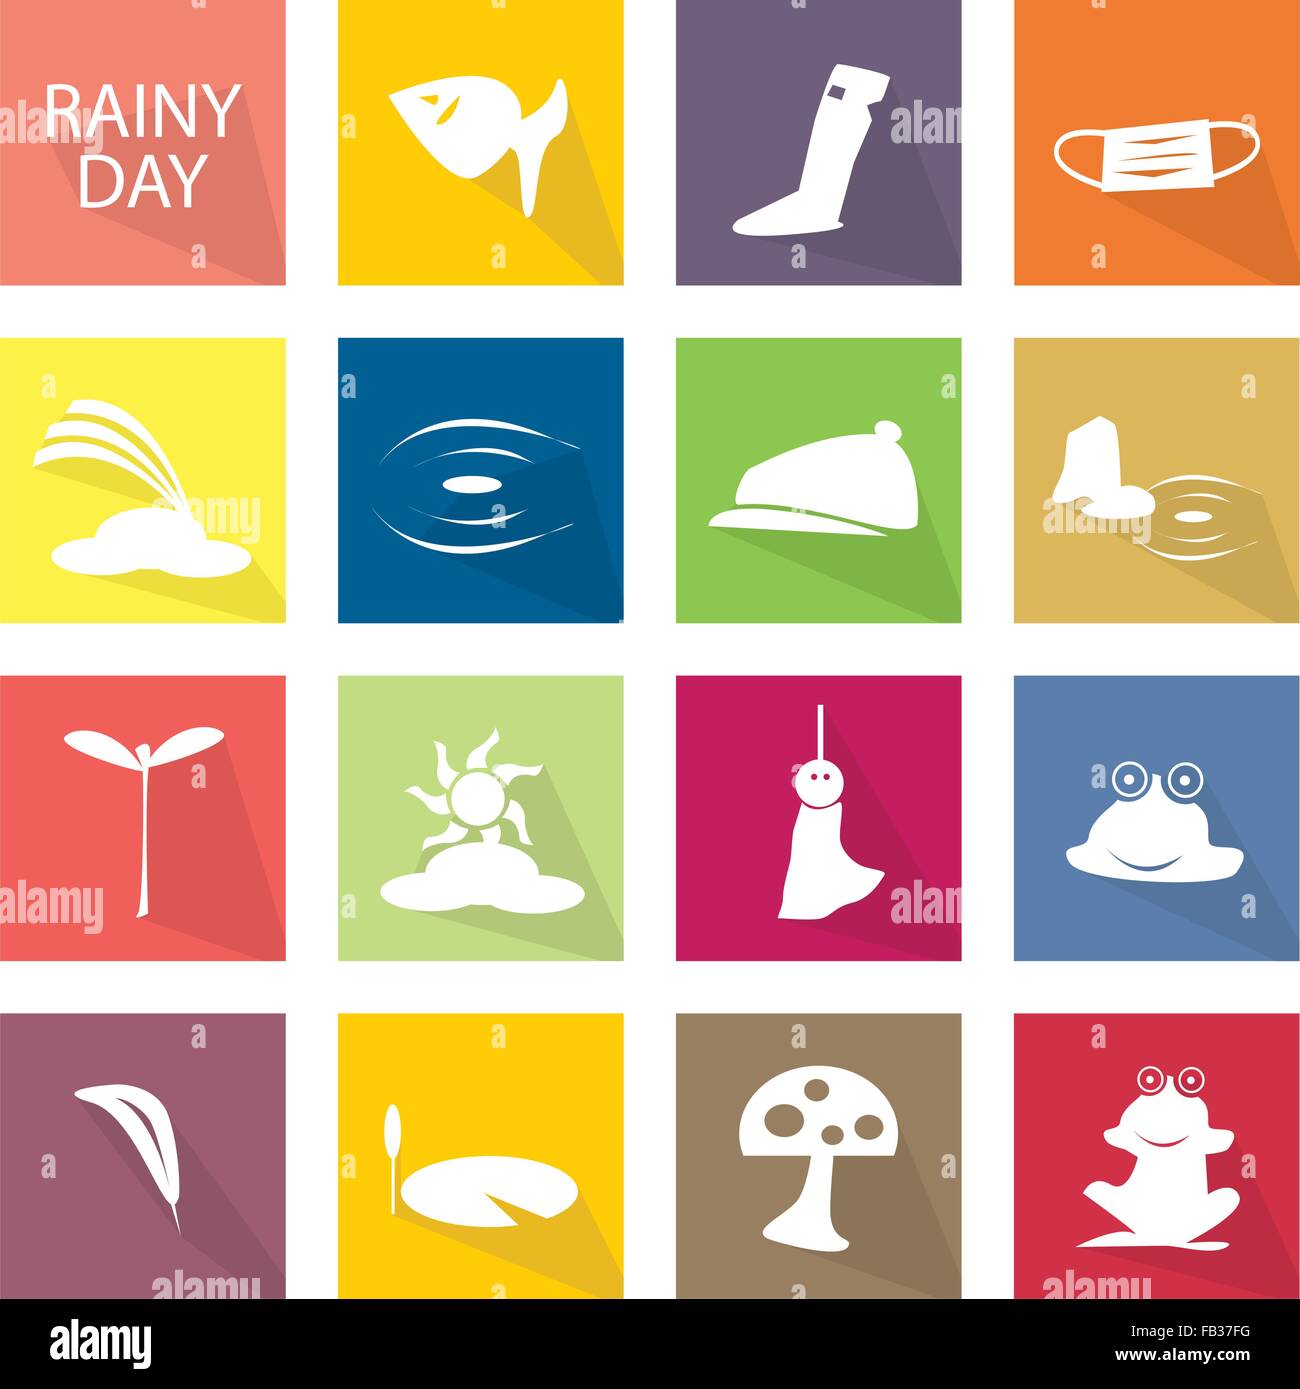 Illustration Collection of Rainy Season or Monsoon Season Icons, One of The Four Temperate Seasons. Stock Vector